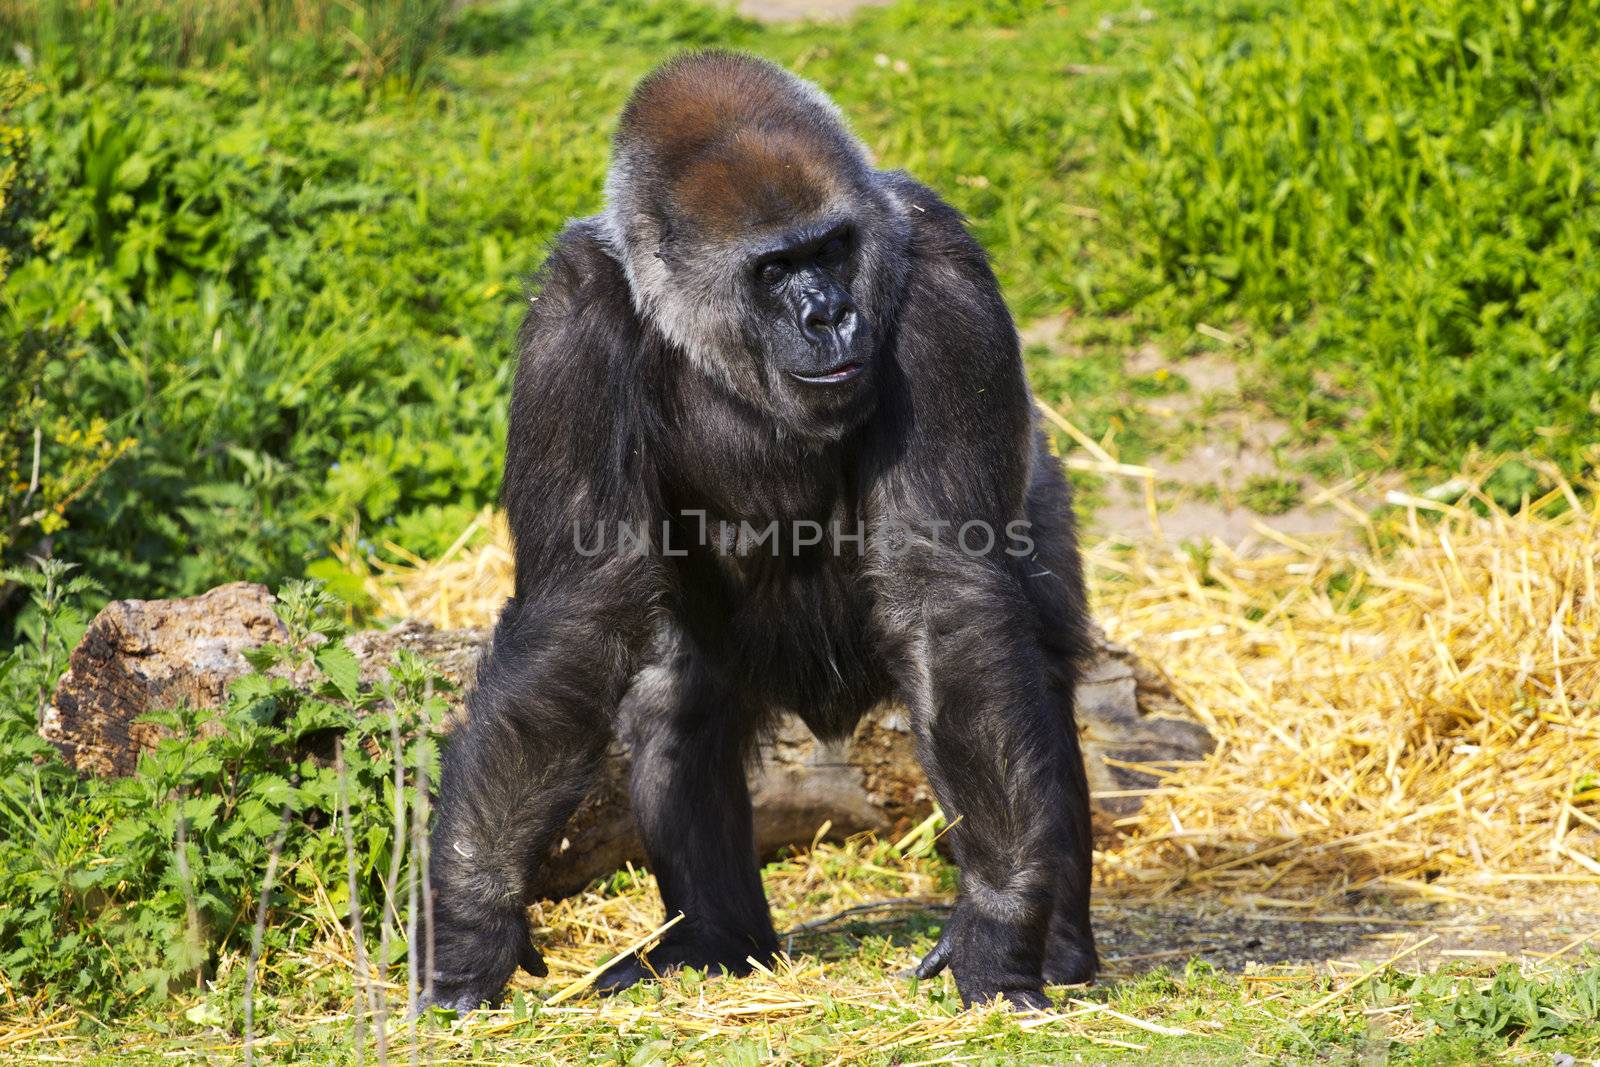 A female western lowland gorilla standing facing forward and looking to the right